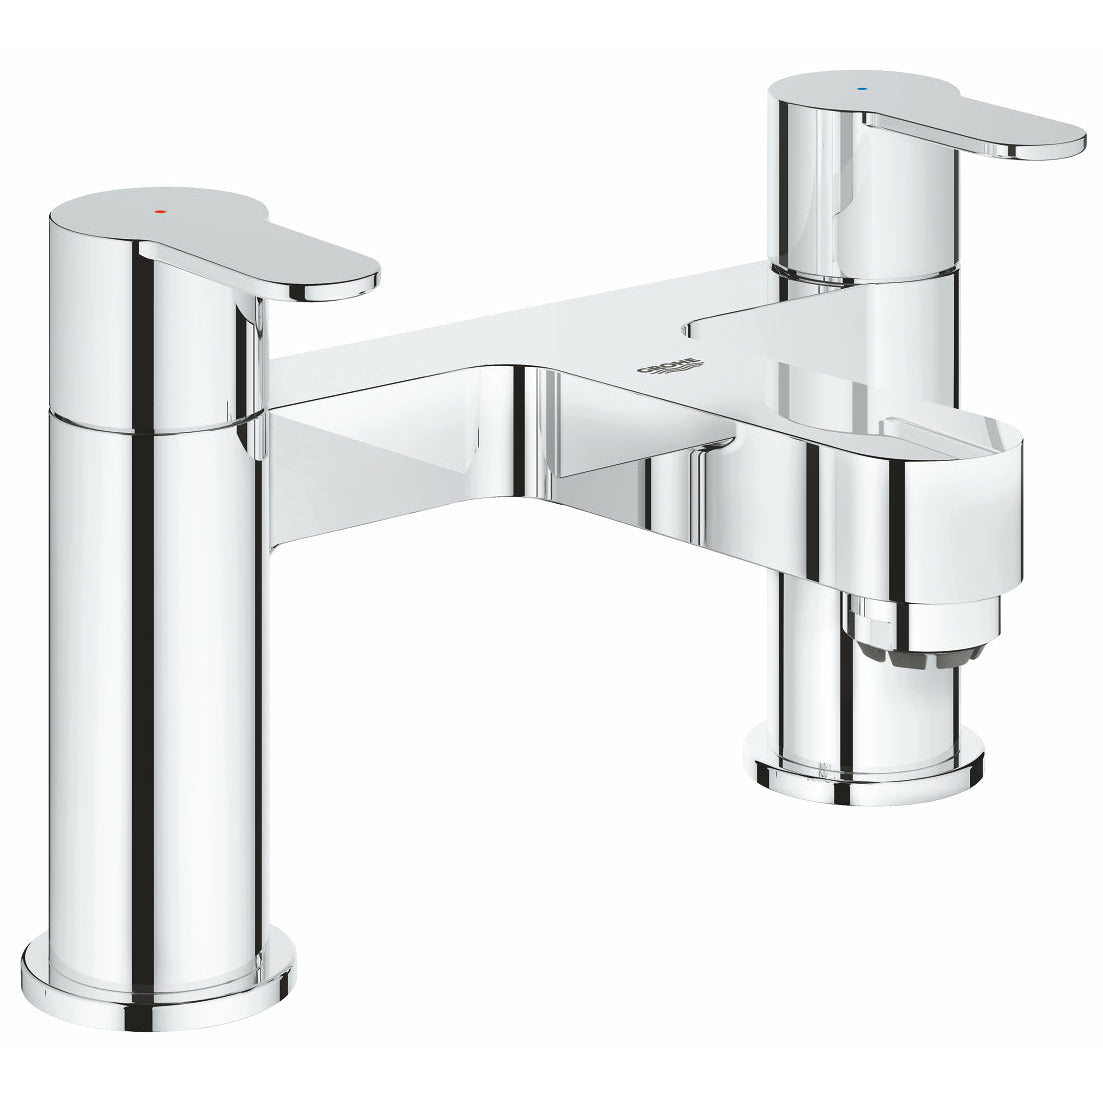 Grohe Deck Mounted BauEdge Two-handled Bath filler 1/2" (Chrome) - Letta London - Deck Mounted Bath Tap